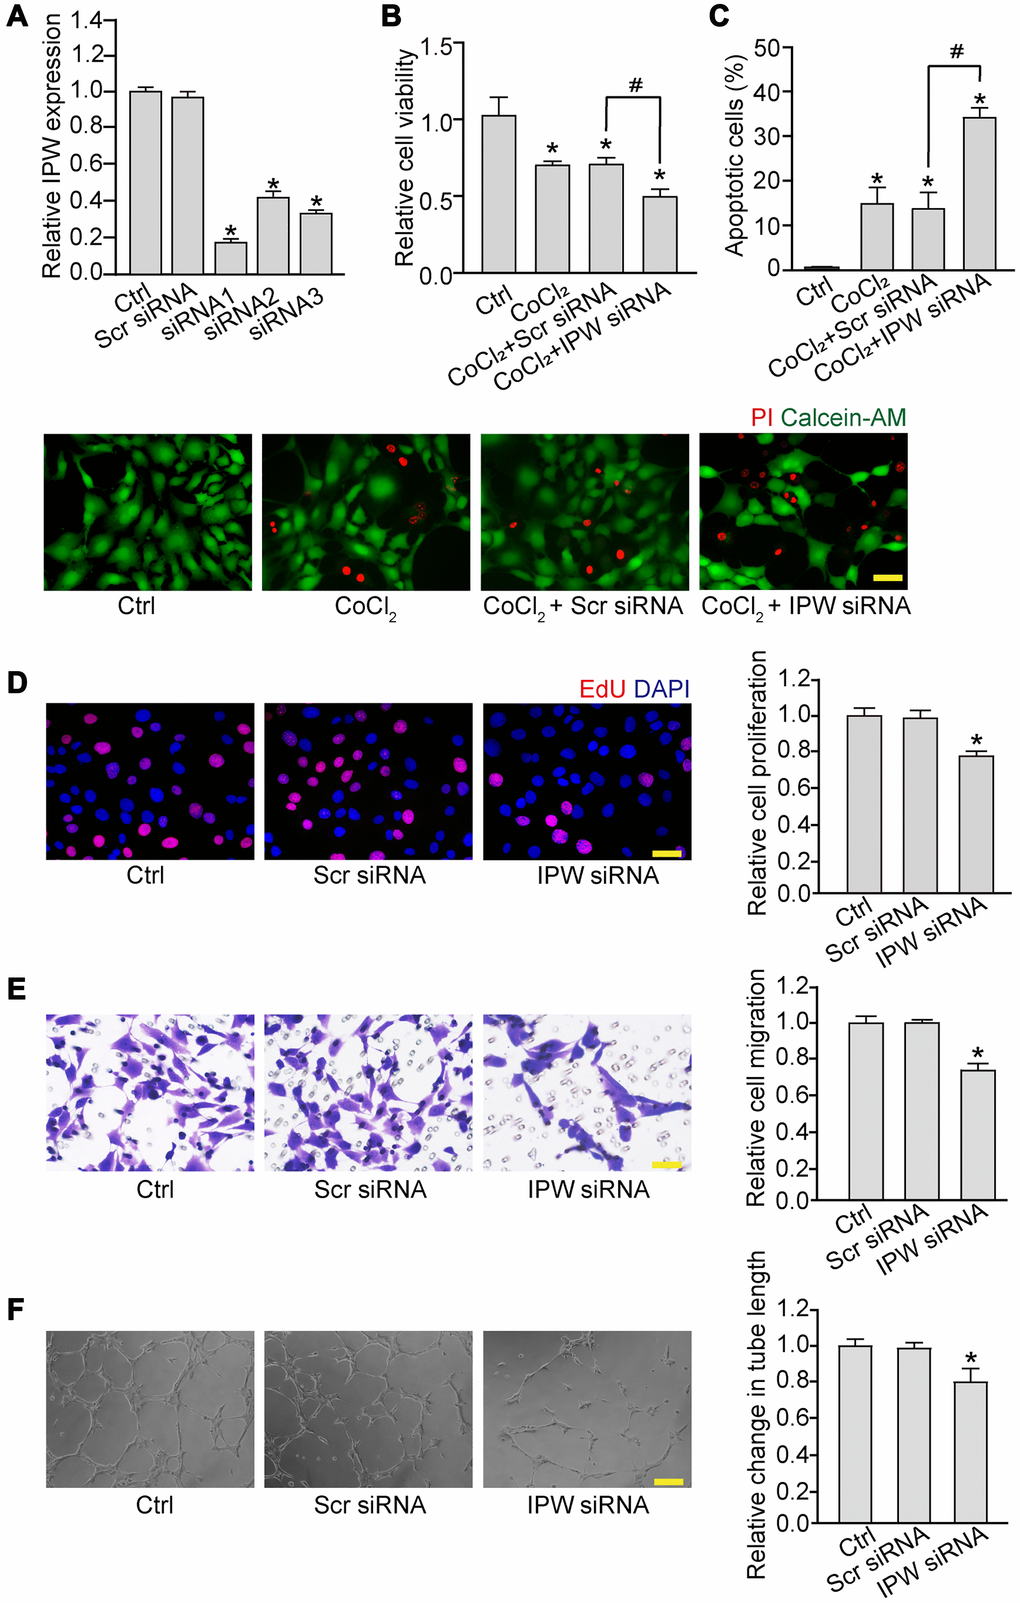 Silencing of lncRNA-IPW reduces endothelial angiogenic function in vitro. (A) RF/6A cells were transfected with scrambled (Scr) siRNA, IPW siRNA, or left untreated (Ctrl) for 24 h. qRT-PCRs were performed to detect IPW expression (n = 4; *P B and C) RF/6A cells were transfected with Scr siRNA, IPW siRNA, or left untreated for 24 h, and then exposed with CoCl2 (200 μmol/L) to mimic hypoxic stress for 24 h. The group without CoCl2 treatment was taken as the Ctrl group. Cell viability was detected by MTT assays (B; n = 4; *P n = 4; *P #P 2 + IPW siRNA versus CoCl2 + Scr siRNA; One-way ANOVA). (D–F) RF/6A cells were transfected with Scr siRNA, IPW siRNA, or left untreated (Ctrl) for 24 h. Cell proliferation was determined by EdU incorporation assay. Blue: DAPI; red: EdU. Scale bar: 20 μm (D; n = 4; *P n = 4; *P n = 4; *P 